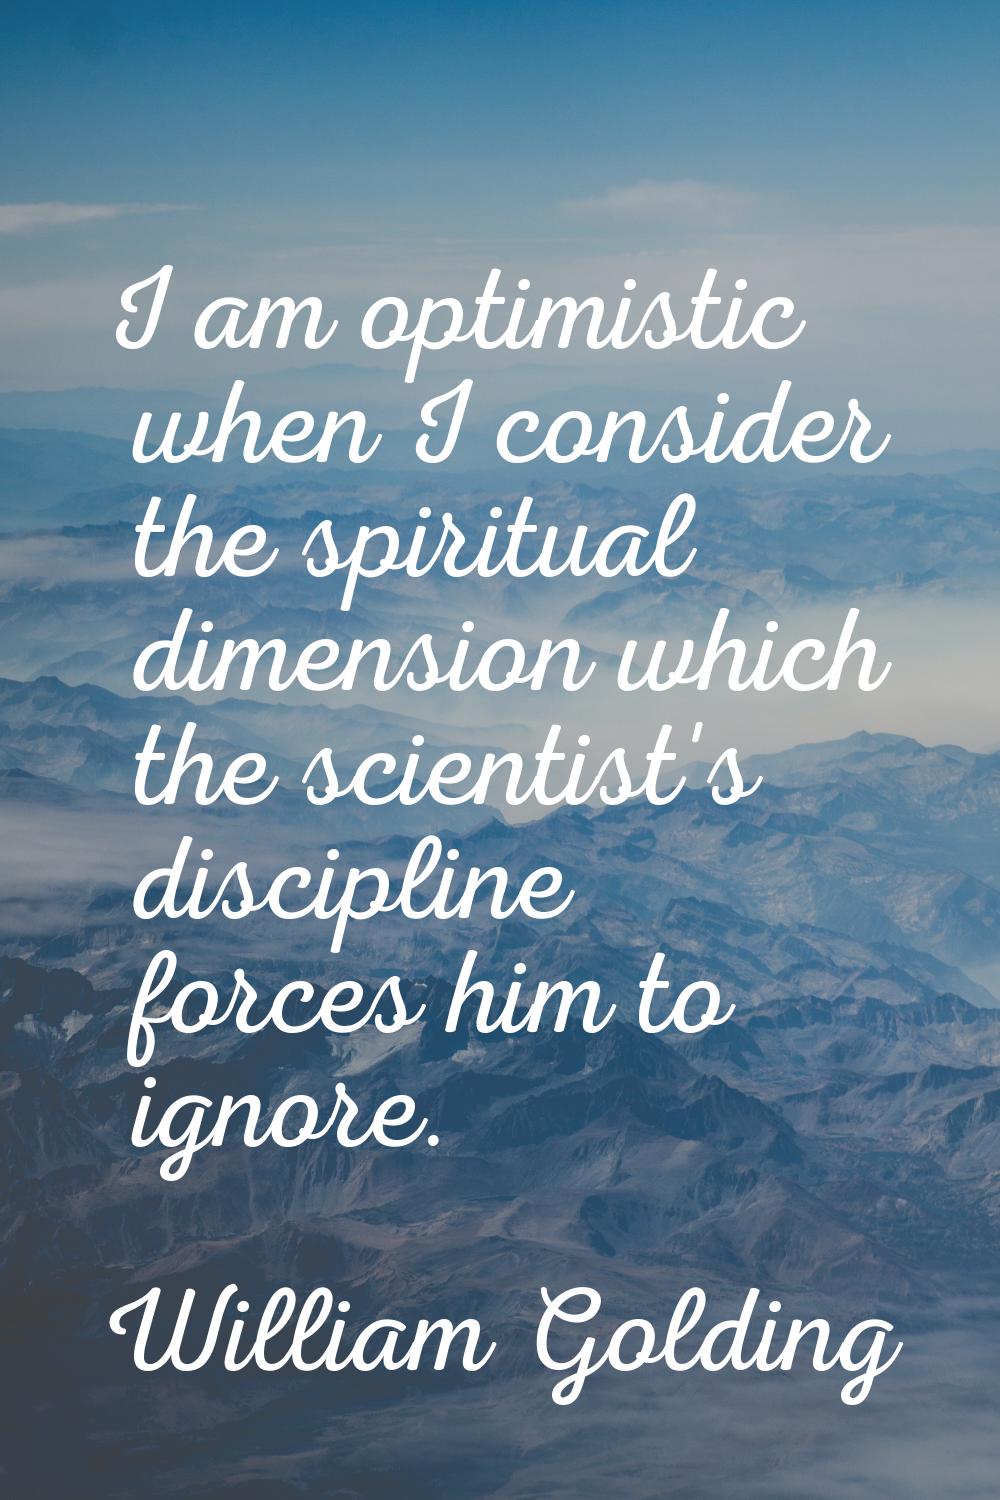 I am optimistic when I consider the spiritual dimension which the scientist's discipline forces him